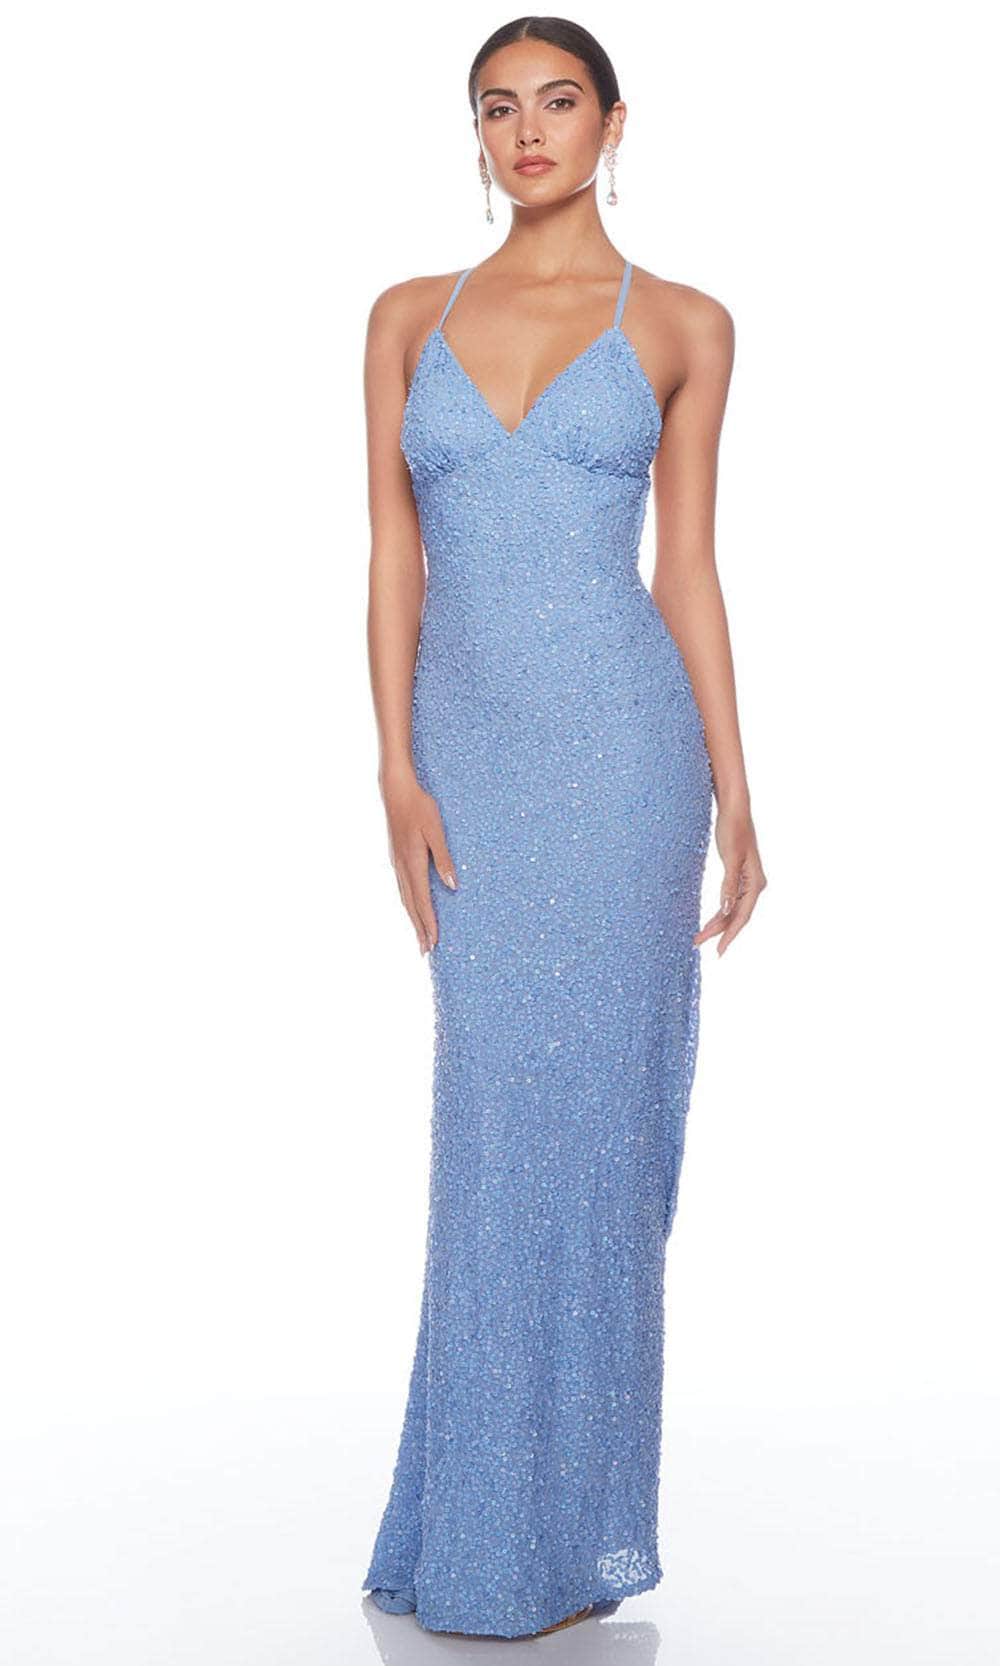 Alyce Paris 88003 - Fitted Sequin Evening Dress
